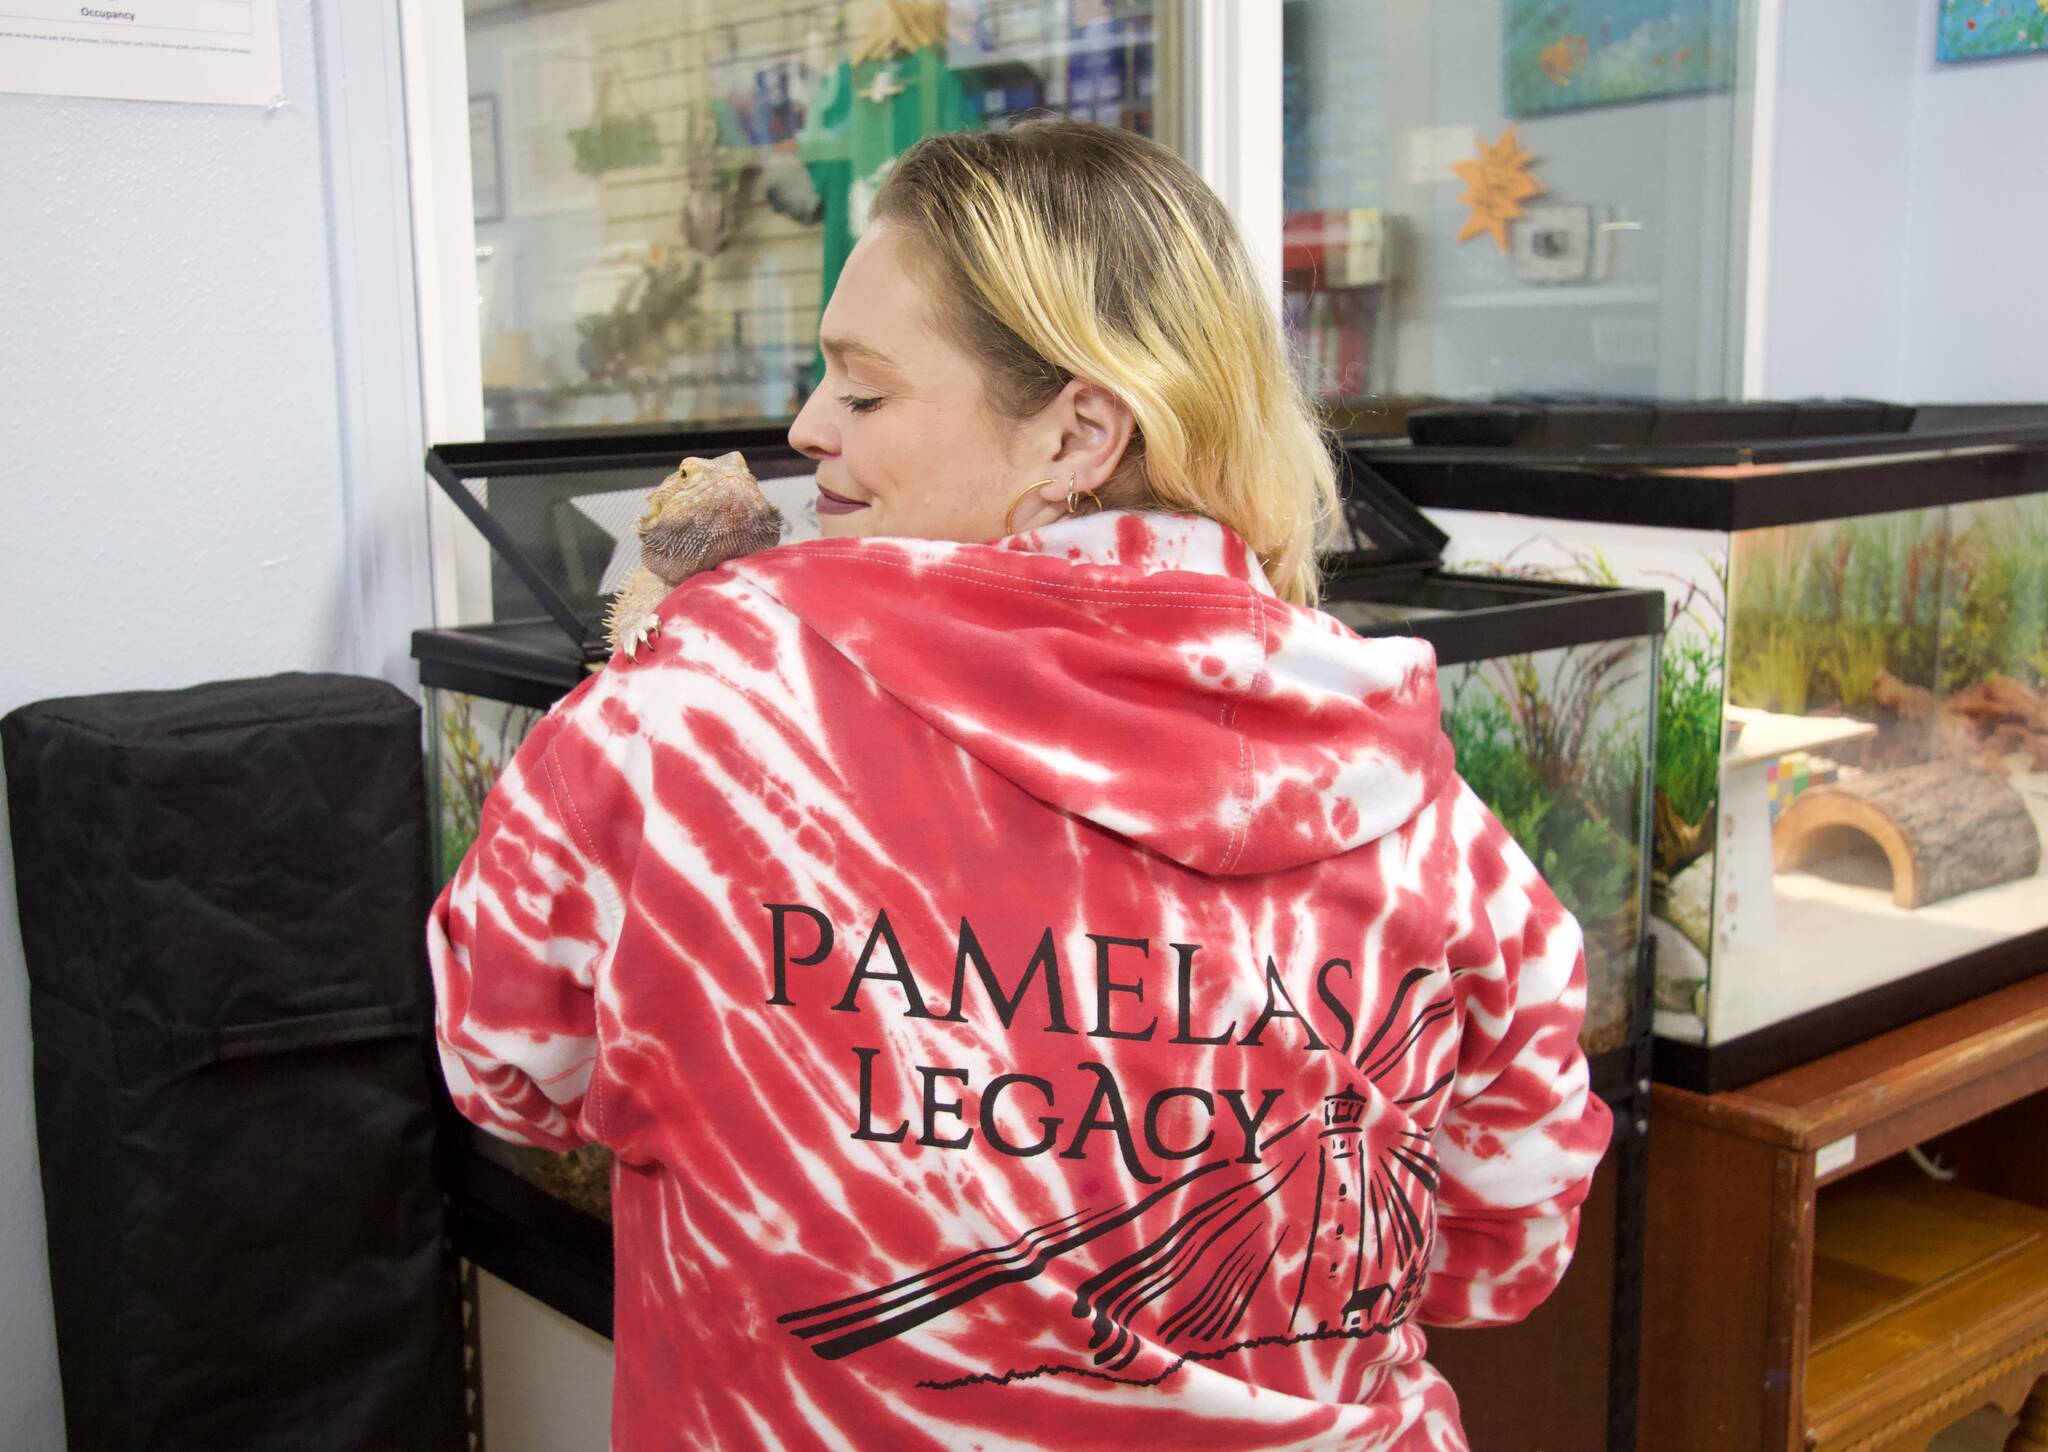 Photo by Rachel Rosen/Whidbey News-Times
Pamela’s Legacy has two store mascots. One is a bearded dragon named Ruby who used to belong to Melinda’s late mother.